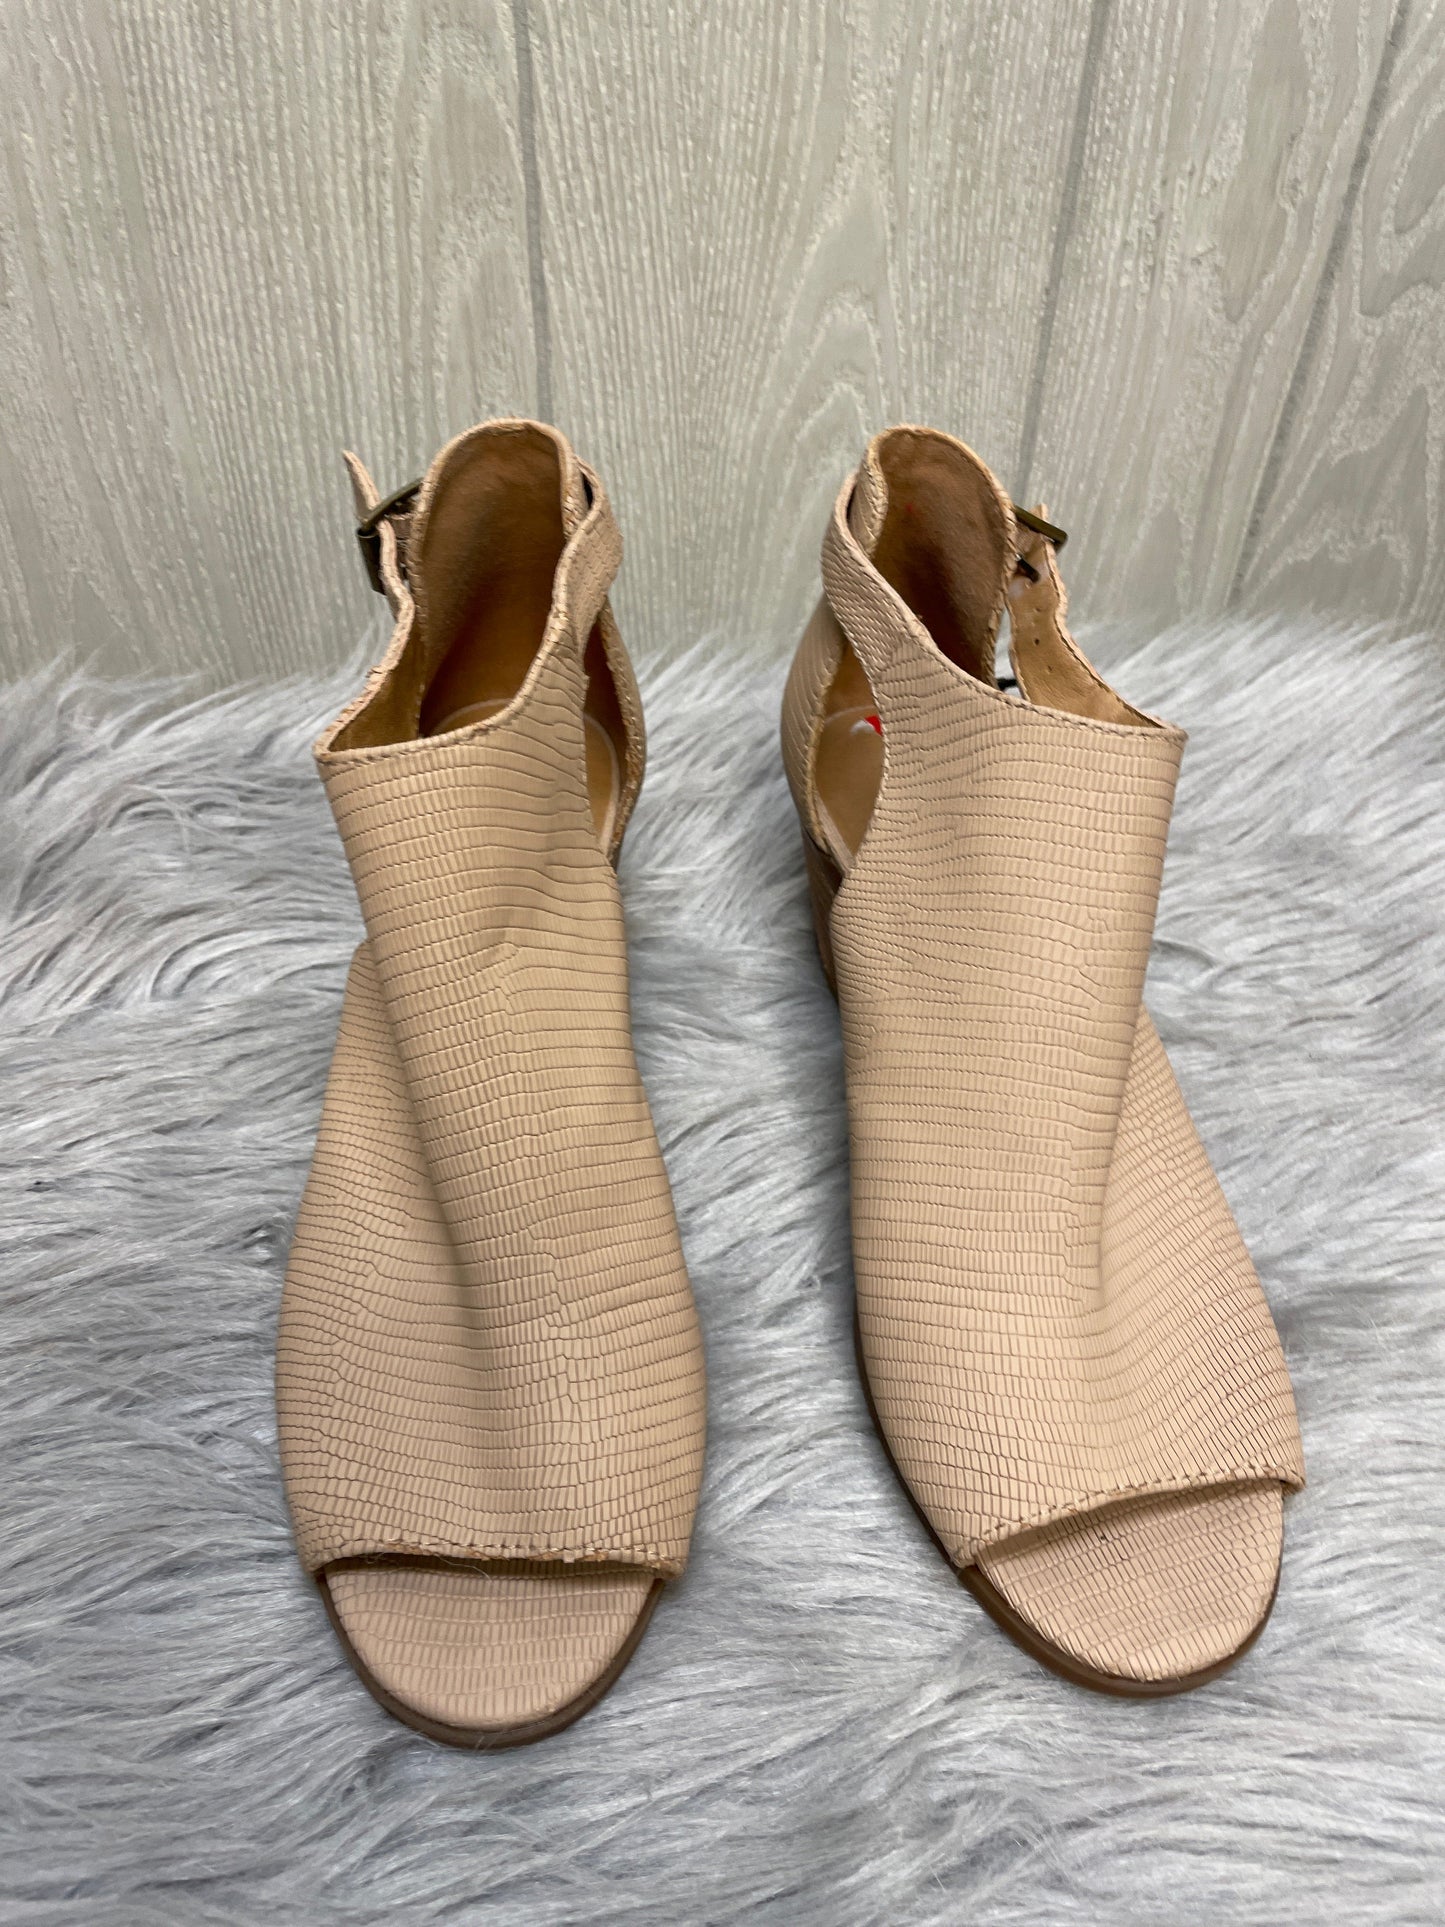 Tan Shoes Heels Block Lucky Brand, Size 10